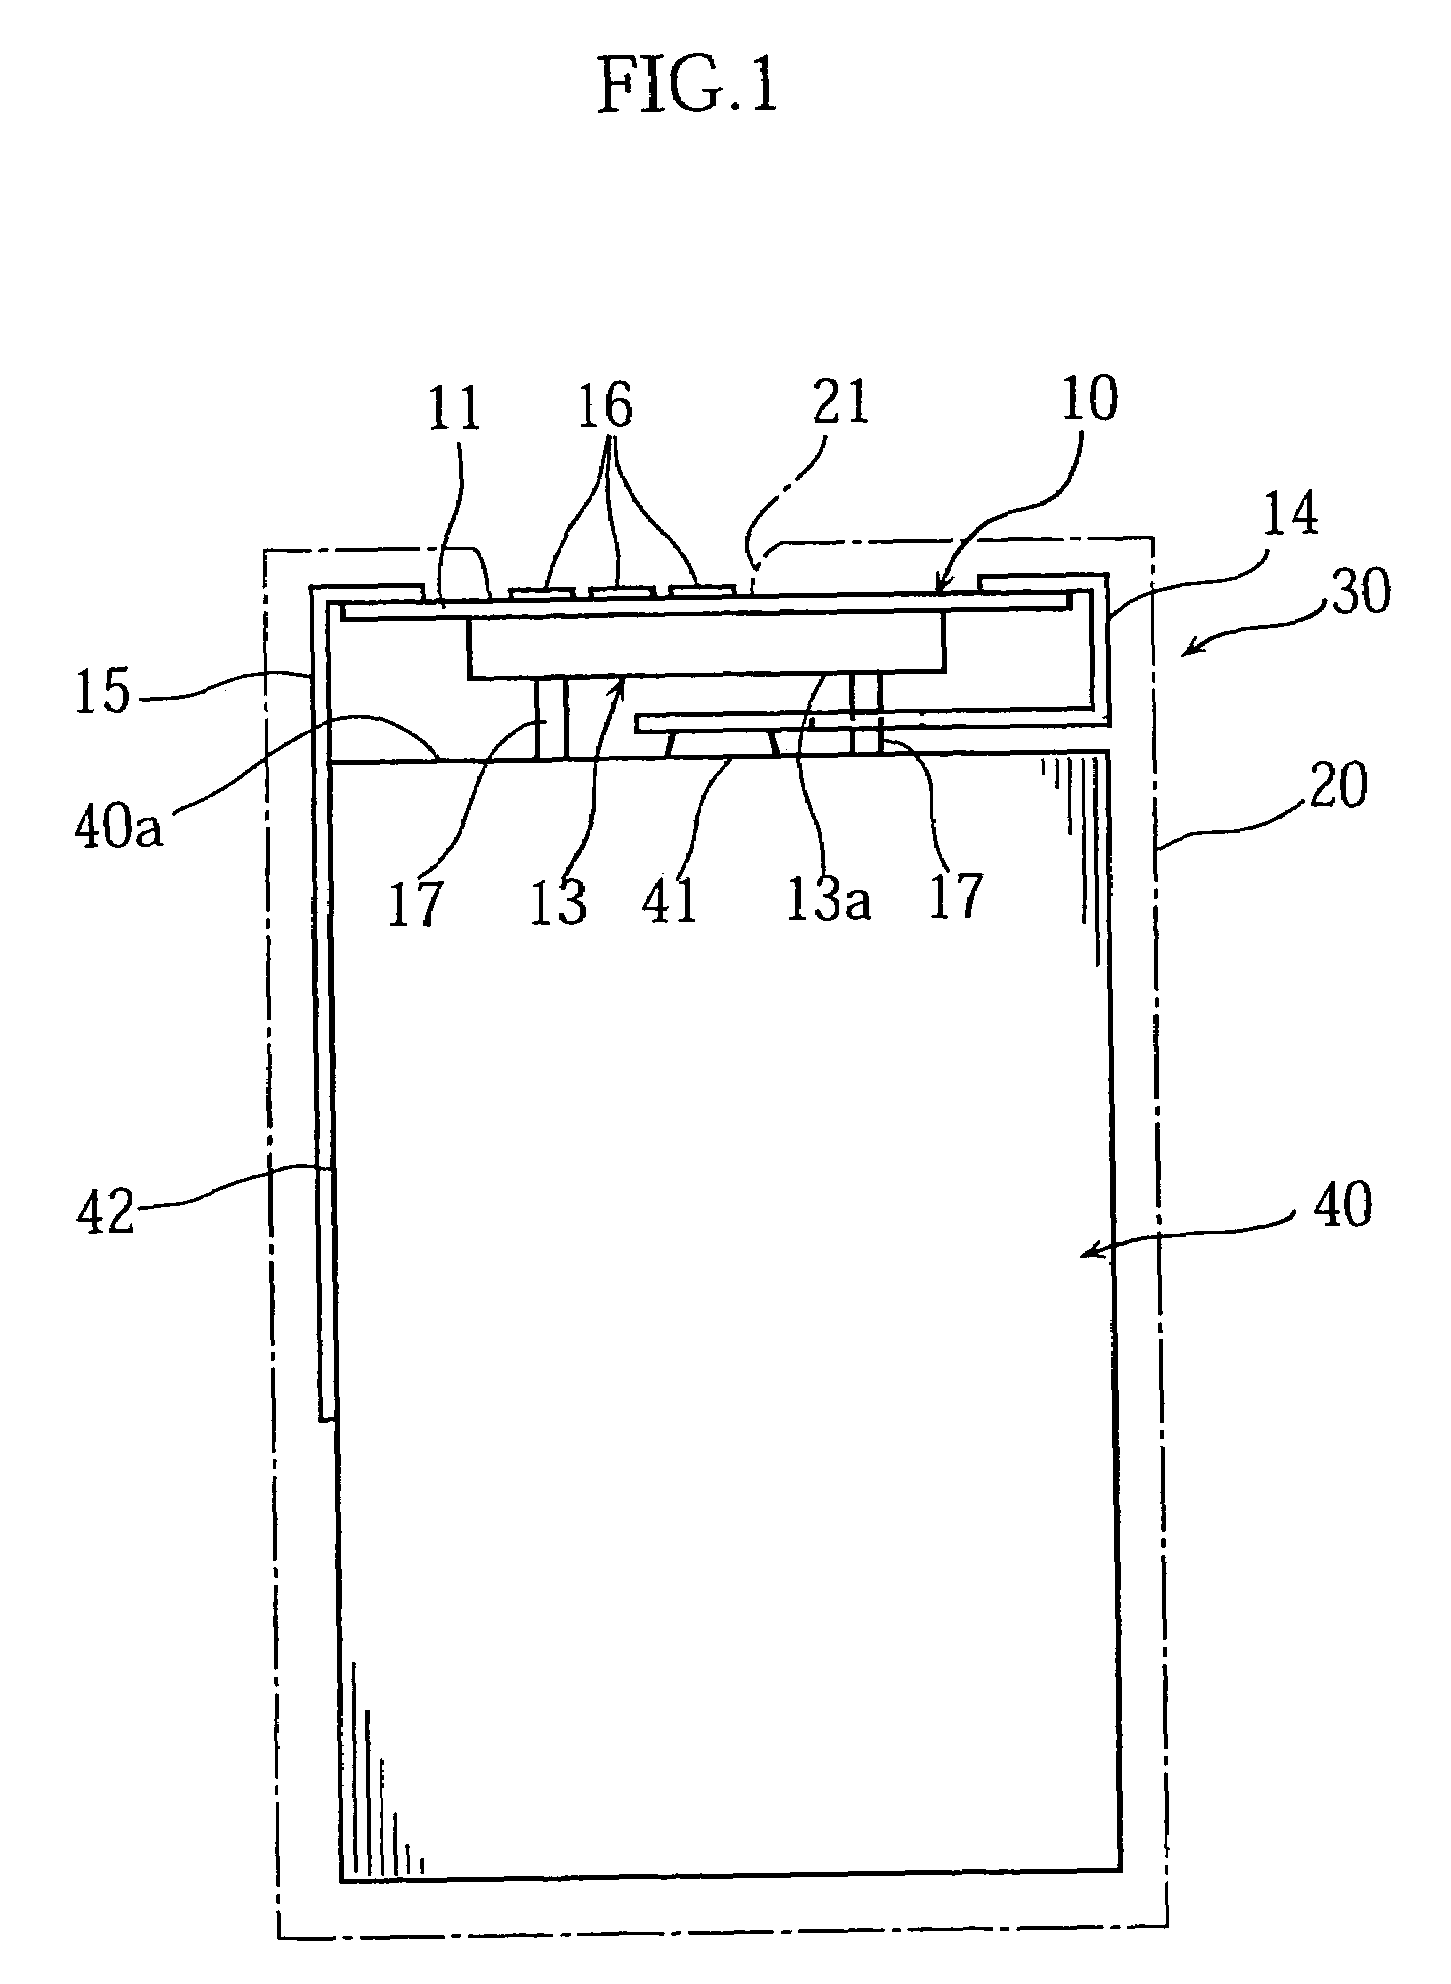 Protection circuit module and battery pack incorporating the same